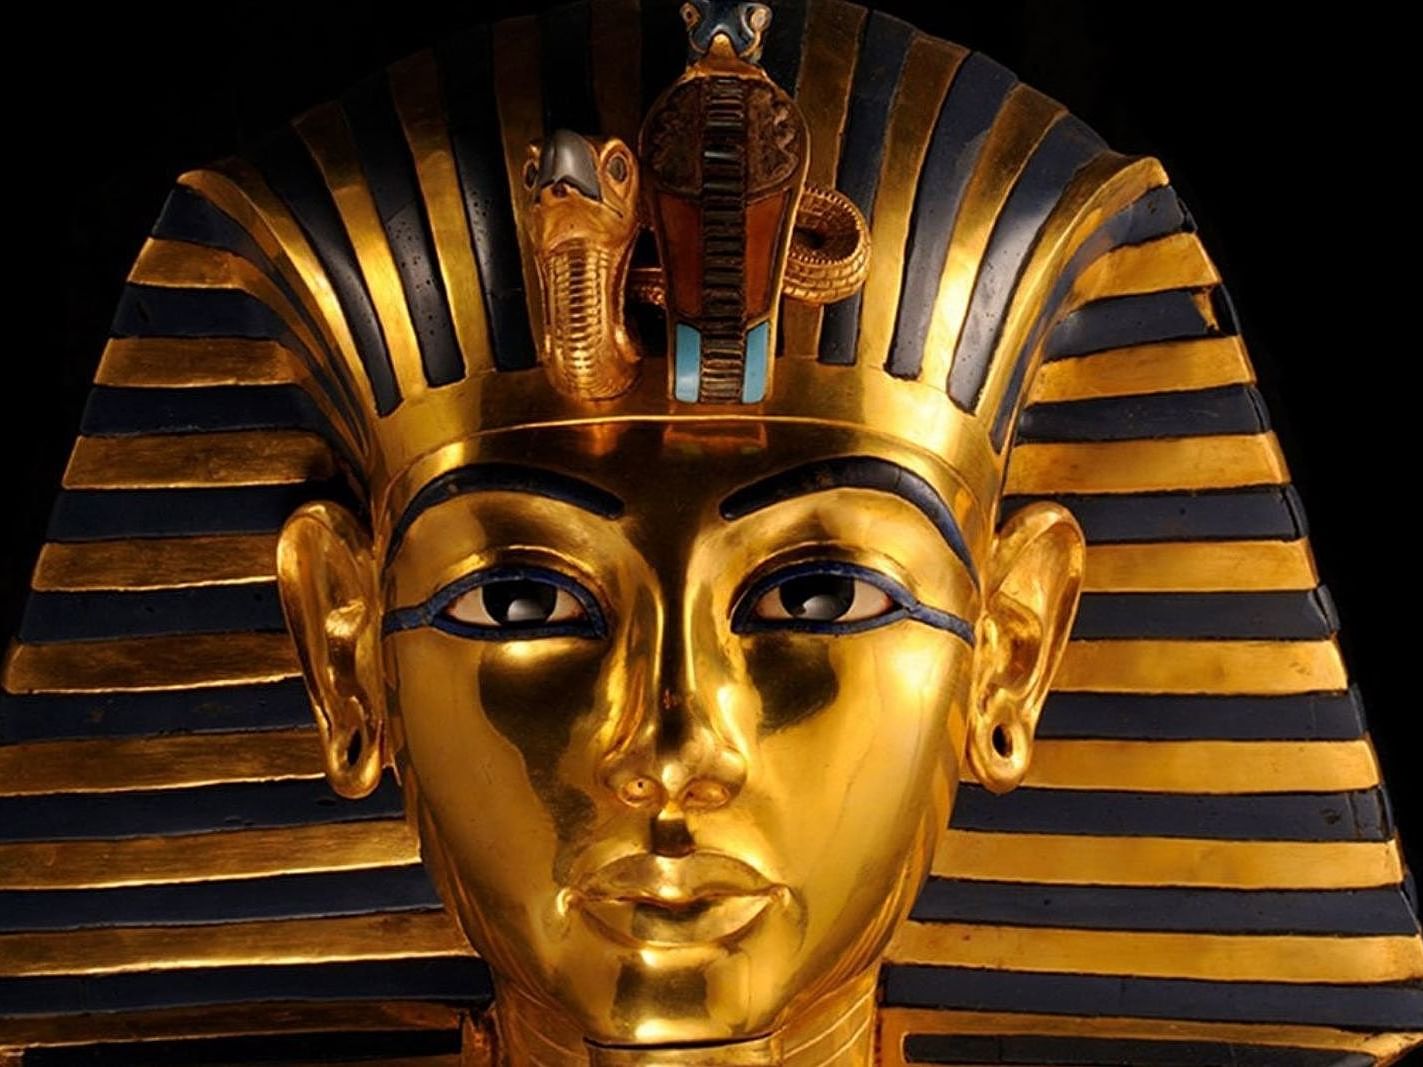 A gold and blue enamel mask of King Tut